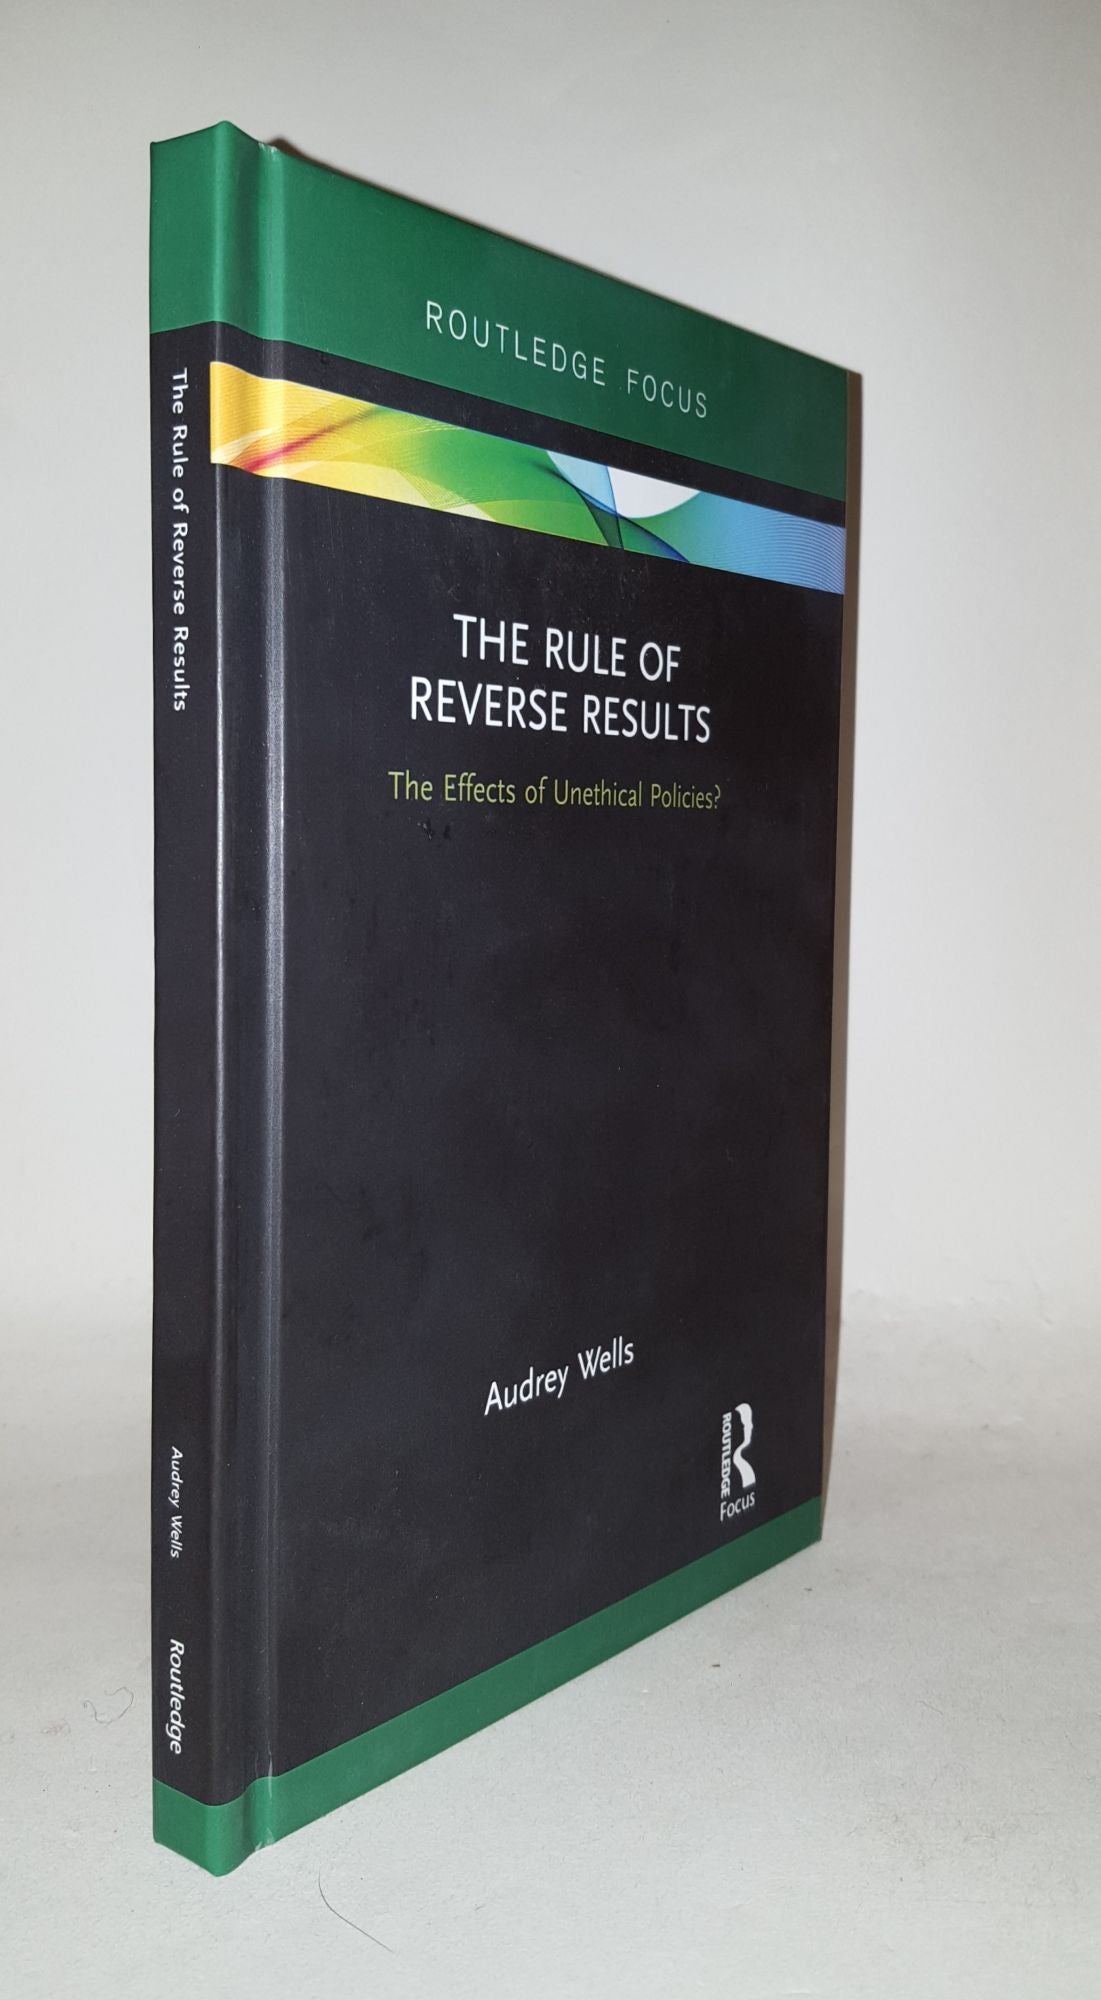 WELLS Audrey - The Rule of Reverse Results the Effects of Unethical Policies